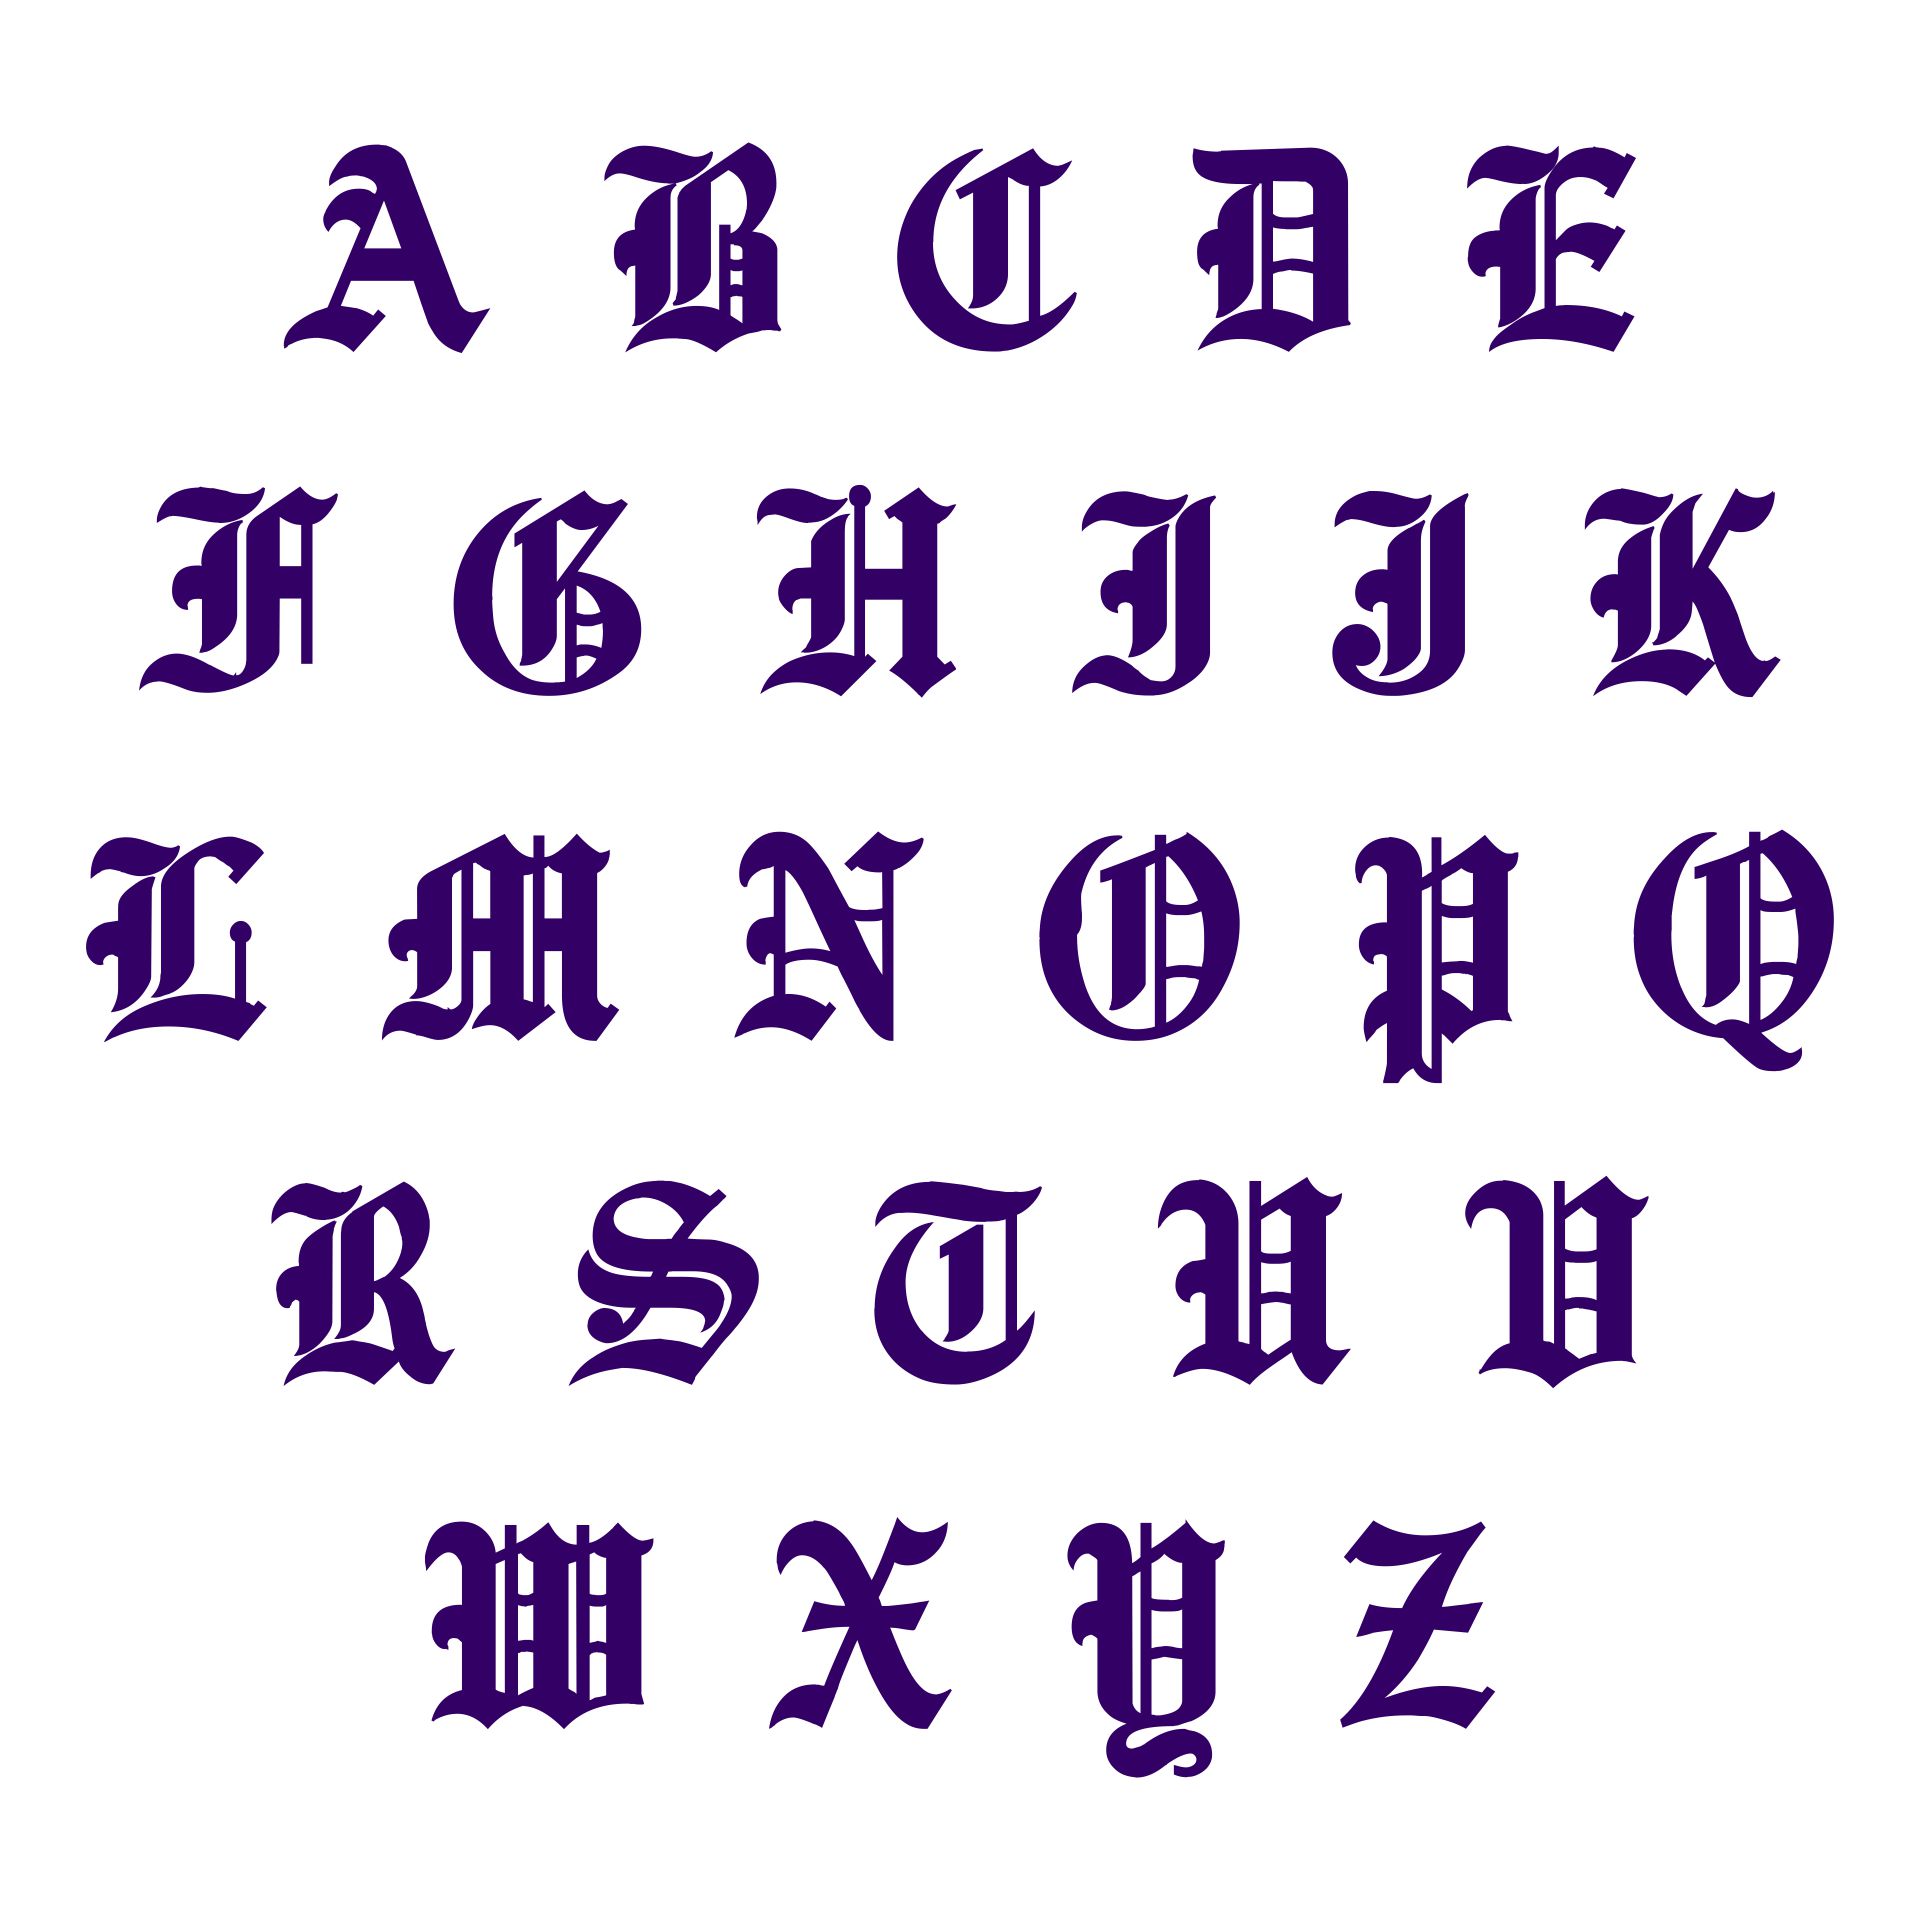 5 Best Images of Printable Old English Alphabet A-Z - Gothic Old ...